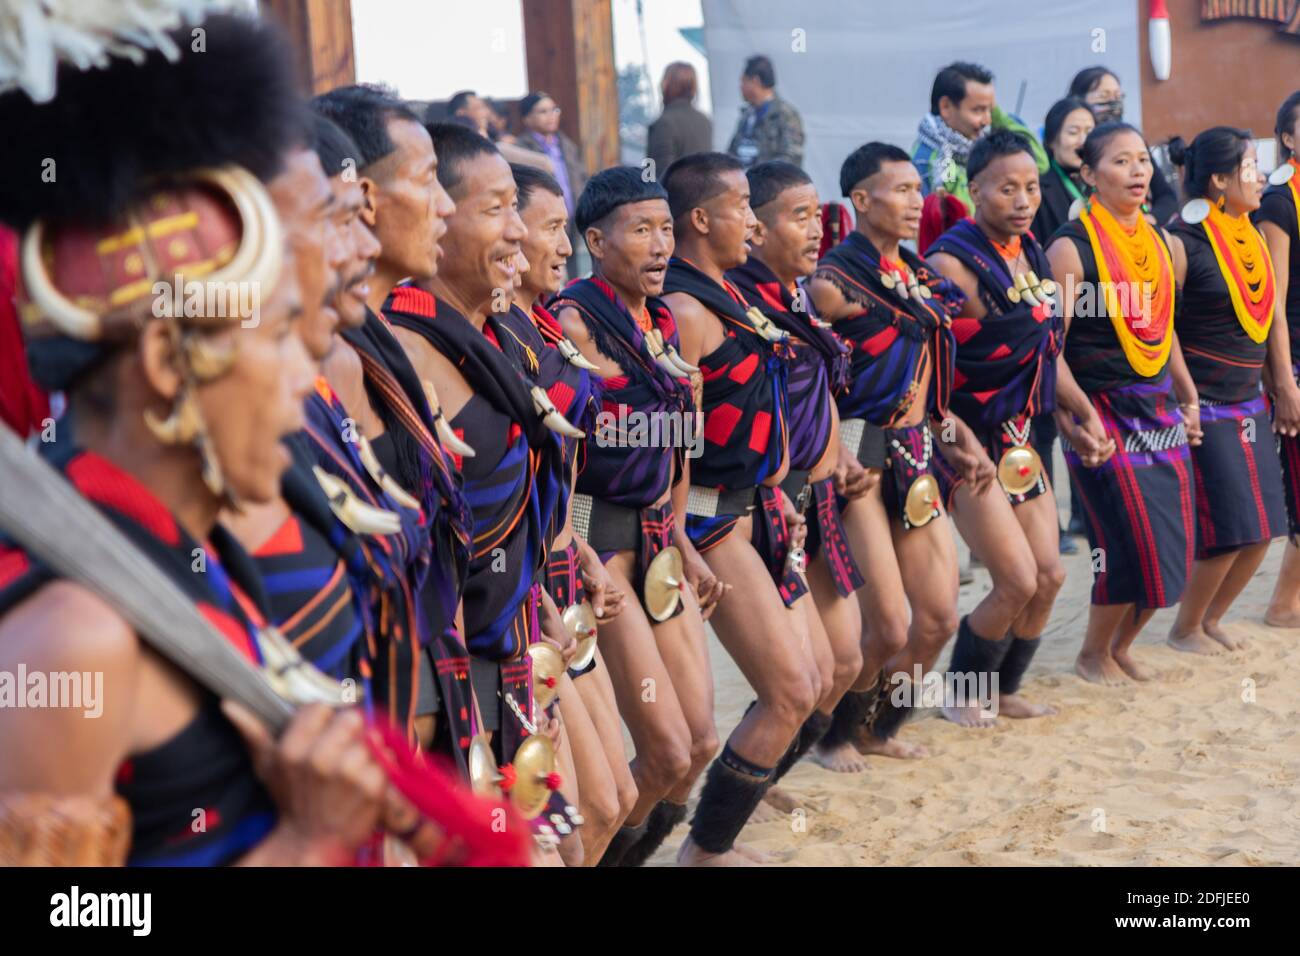 A group of naga tribesmen and women dressed in their traditional attire dancing during Hornbill festival in Nagaland India on 2 December 2016 Stock Photo